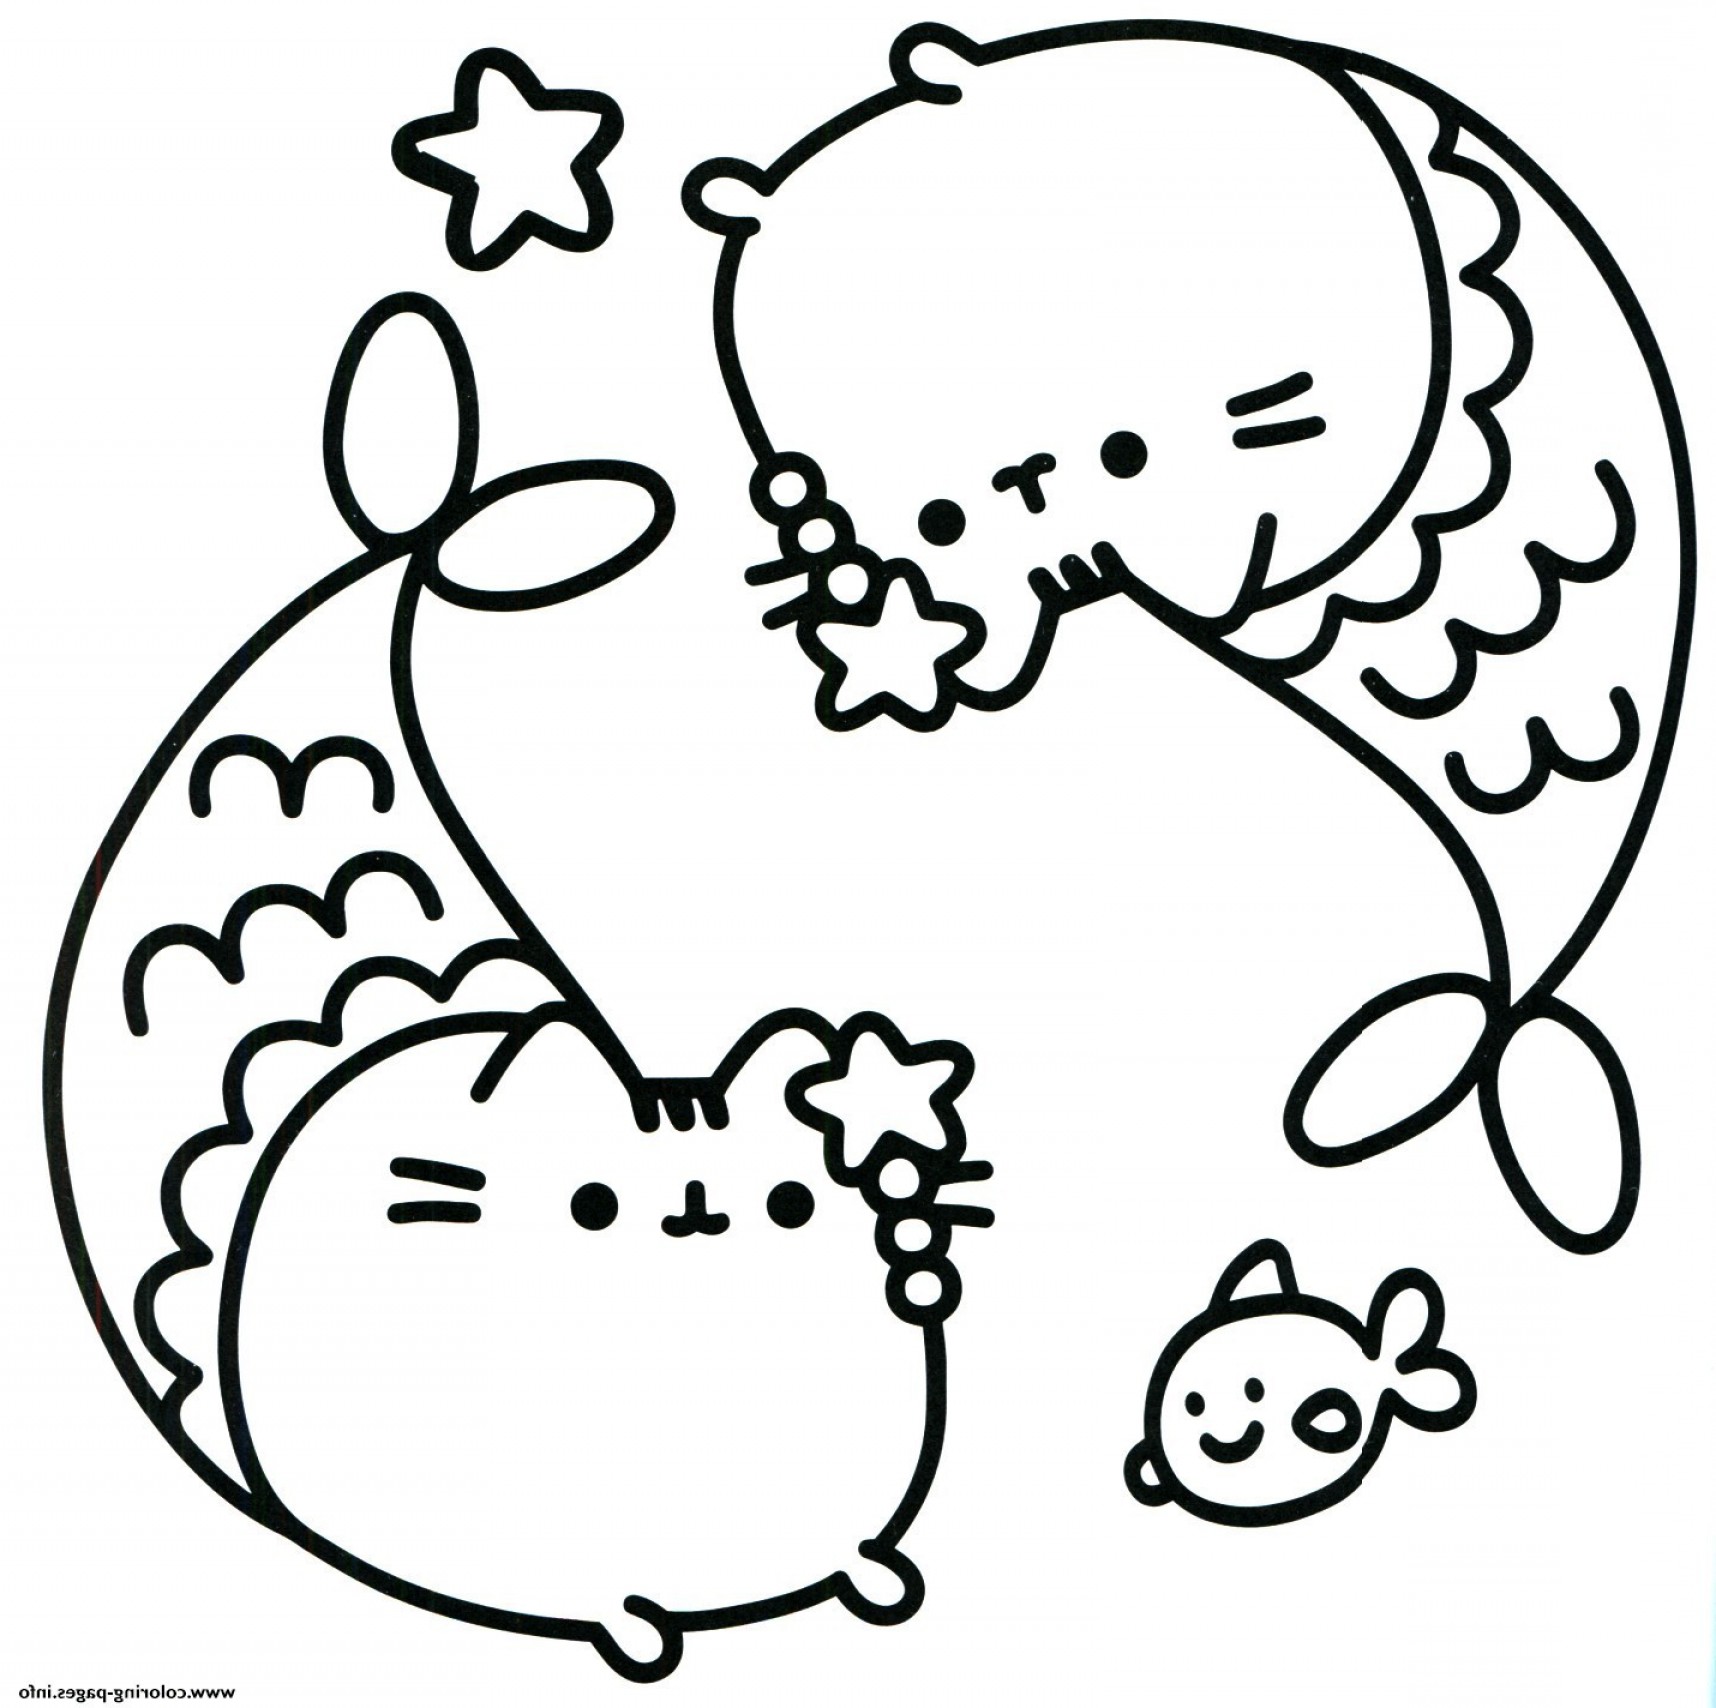 Mermaid Cute Pusheen Coloring Pages - pic-nugget